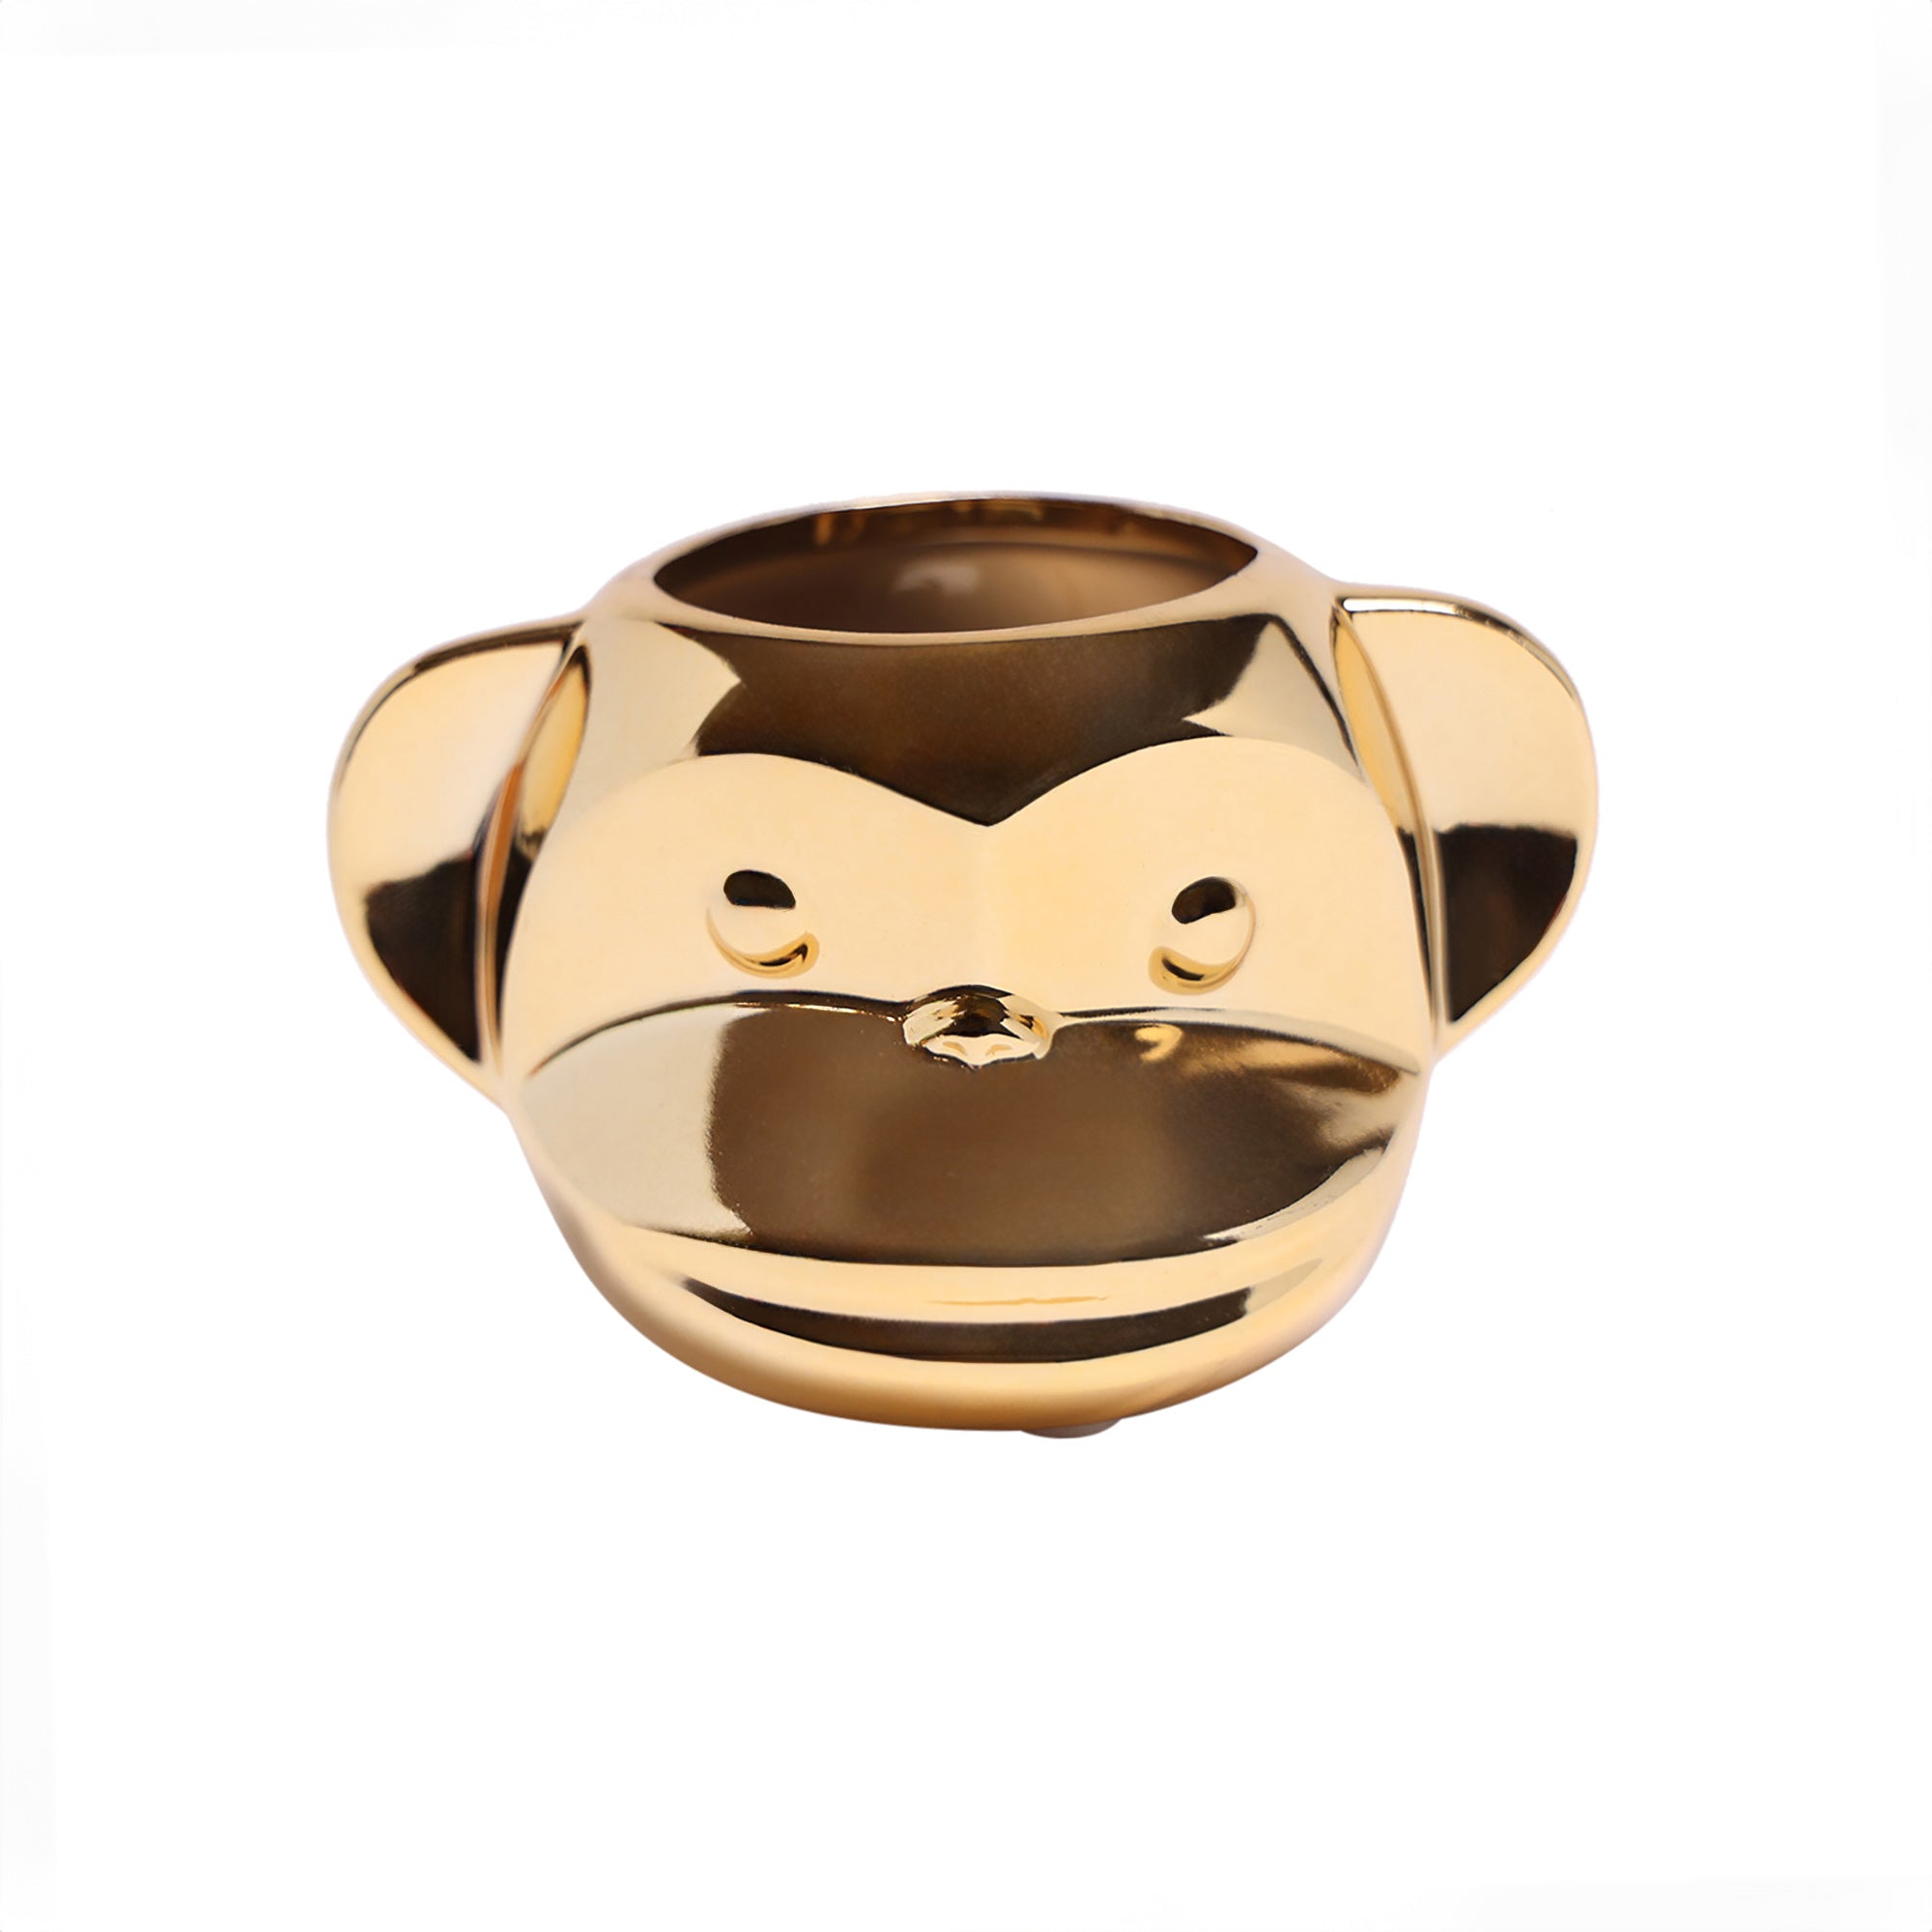 Funky Monkey Planter with a glossy finish, viewed from the front against a white background. The pot features stylized eyes, nose, and mouth, resembling a Chive Studio 2024 monkey's face.